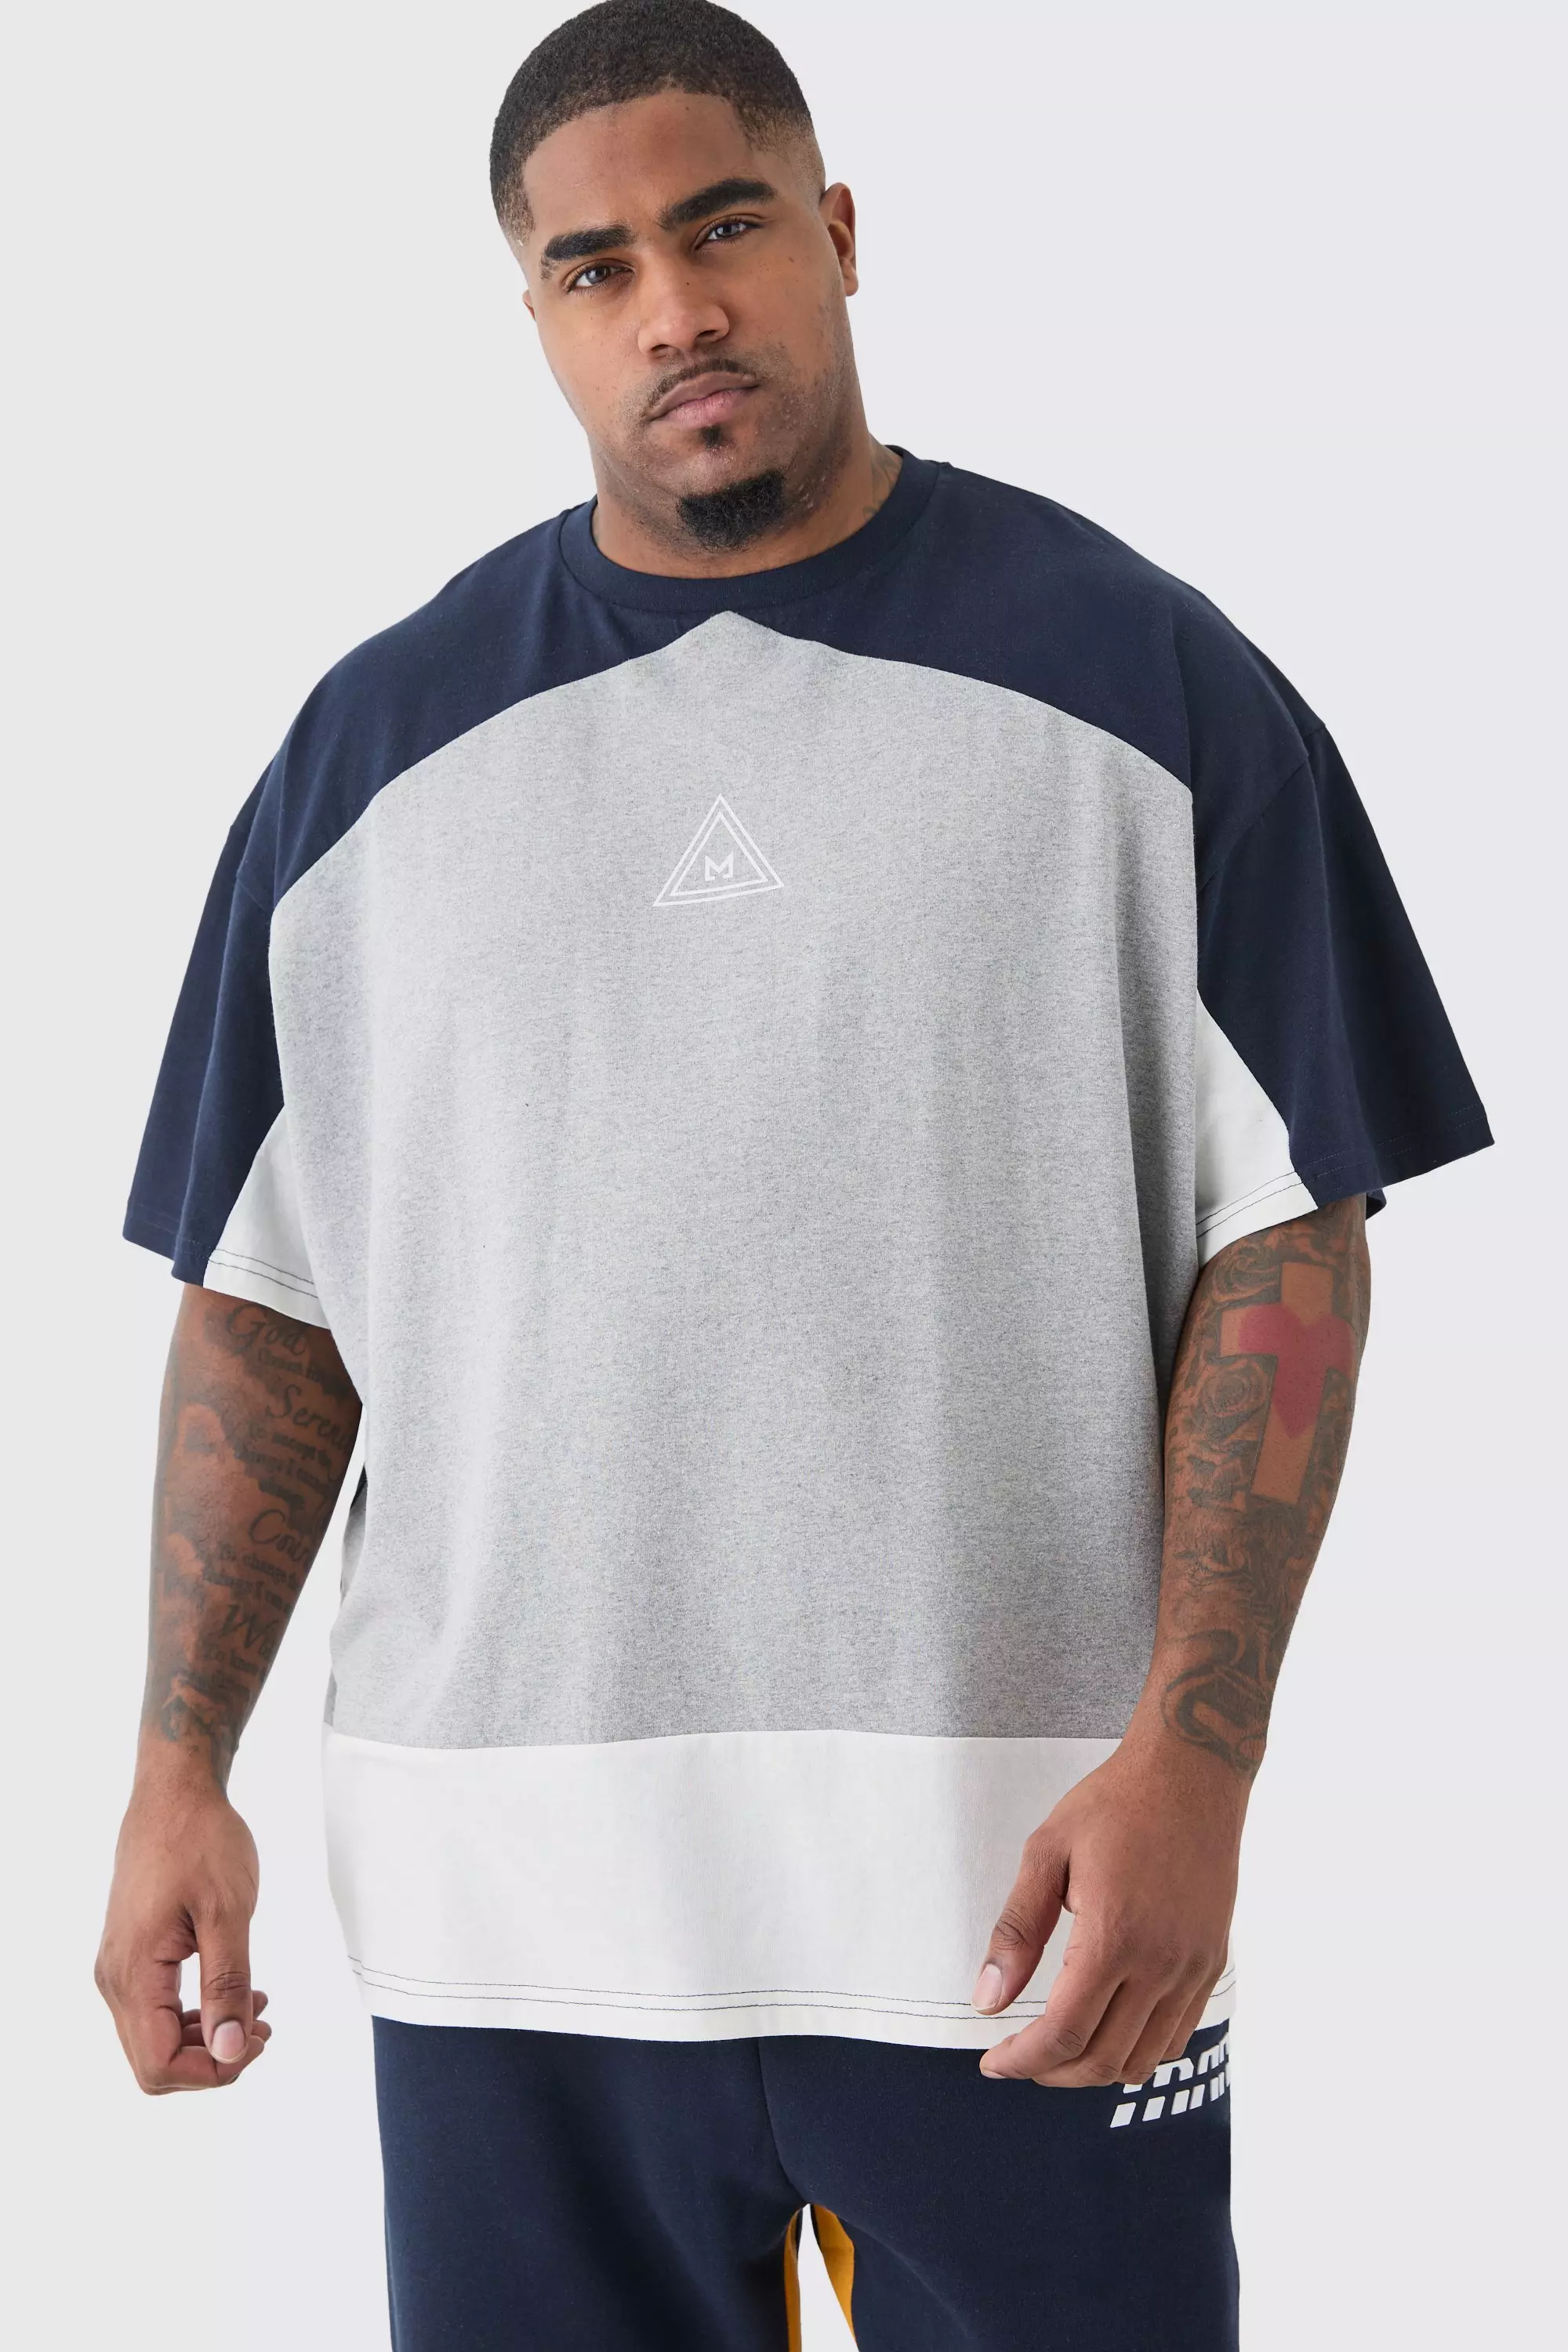 Plus Oversized Branded Colour Block T-shirt In Grey Marl Grey marl